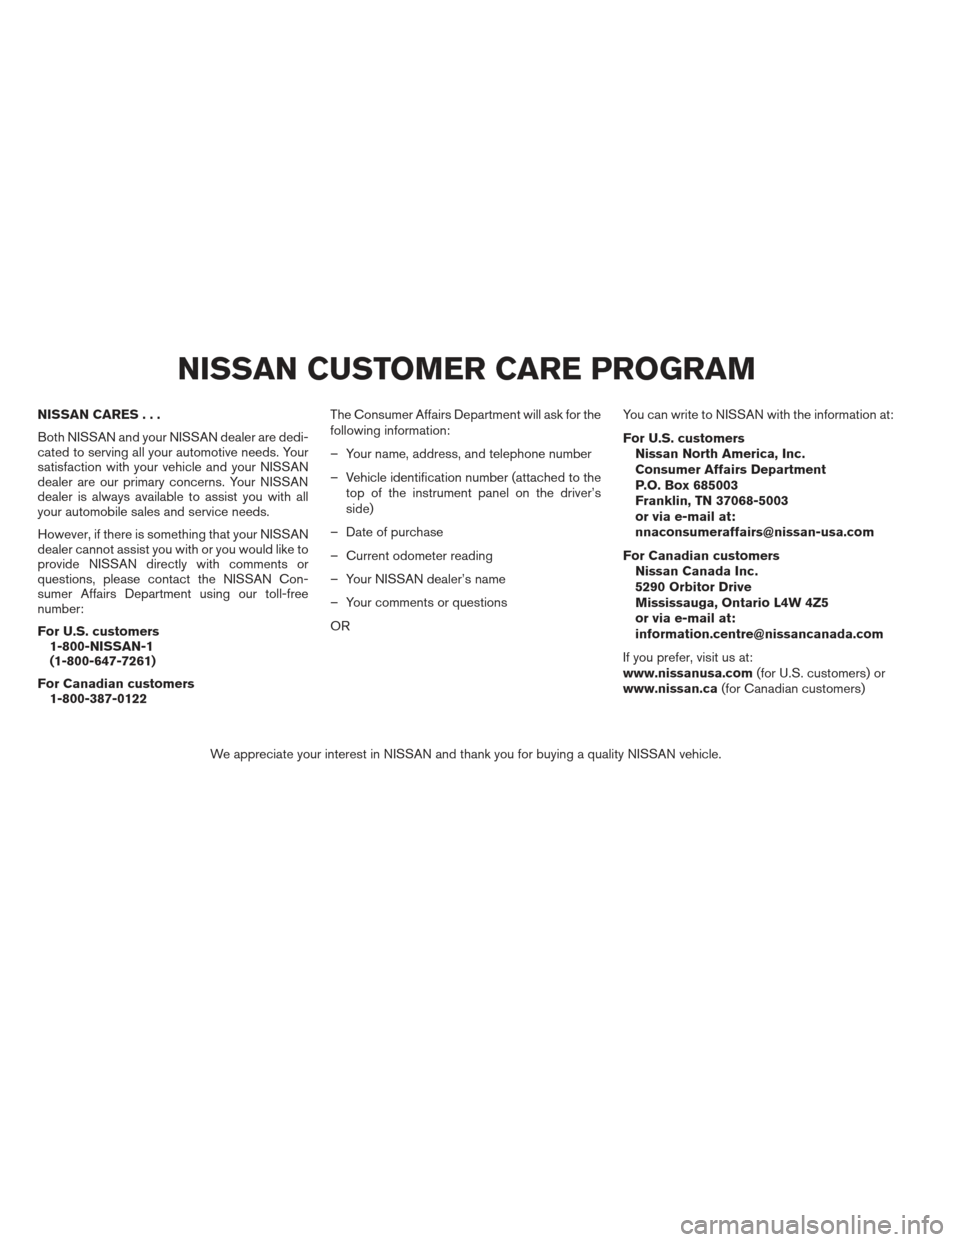 NISSAN PATHFINDER 2013 R52 / 4.G Owners Manual NISSAN CARES...
Both NISSAN and your NISSAN dealer are dedi-
cated to serving all your automotive needs. Your
satisfaction with your vehicle and your NISSAN
dealer are our primary concerns. Your NISSA